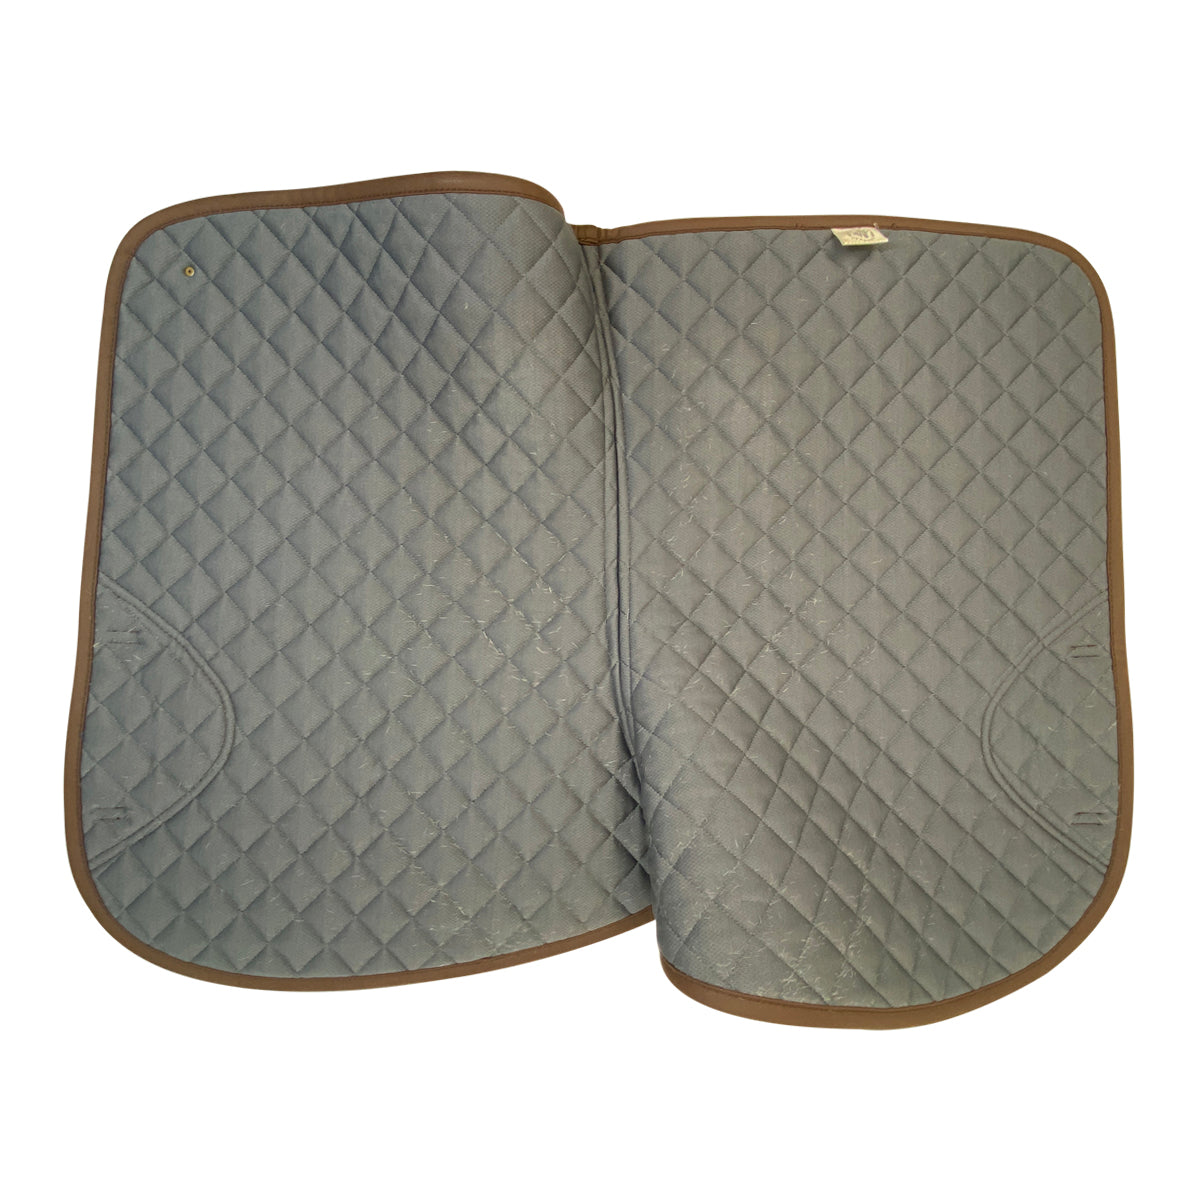 Sixteen Cypress Jumper Pad in Navy & Hickory